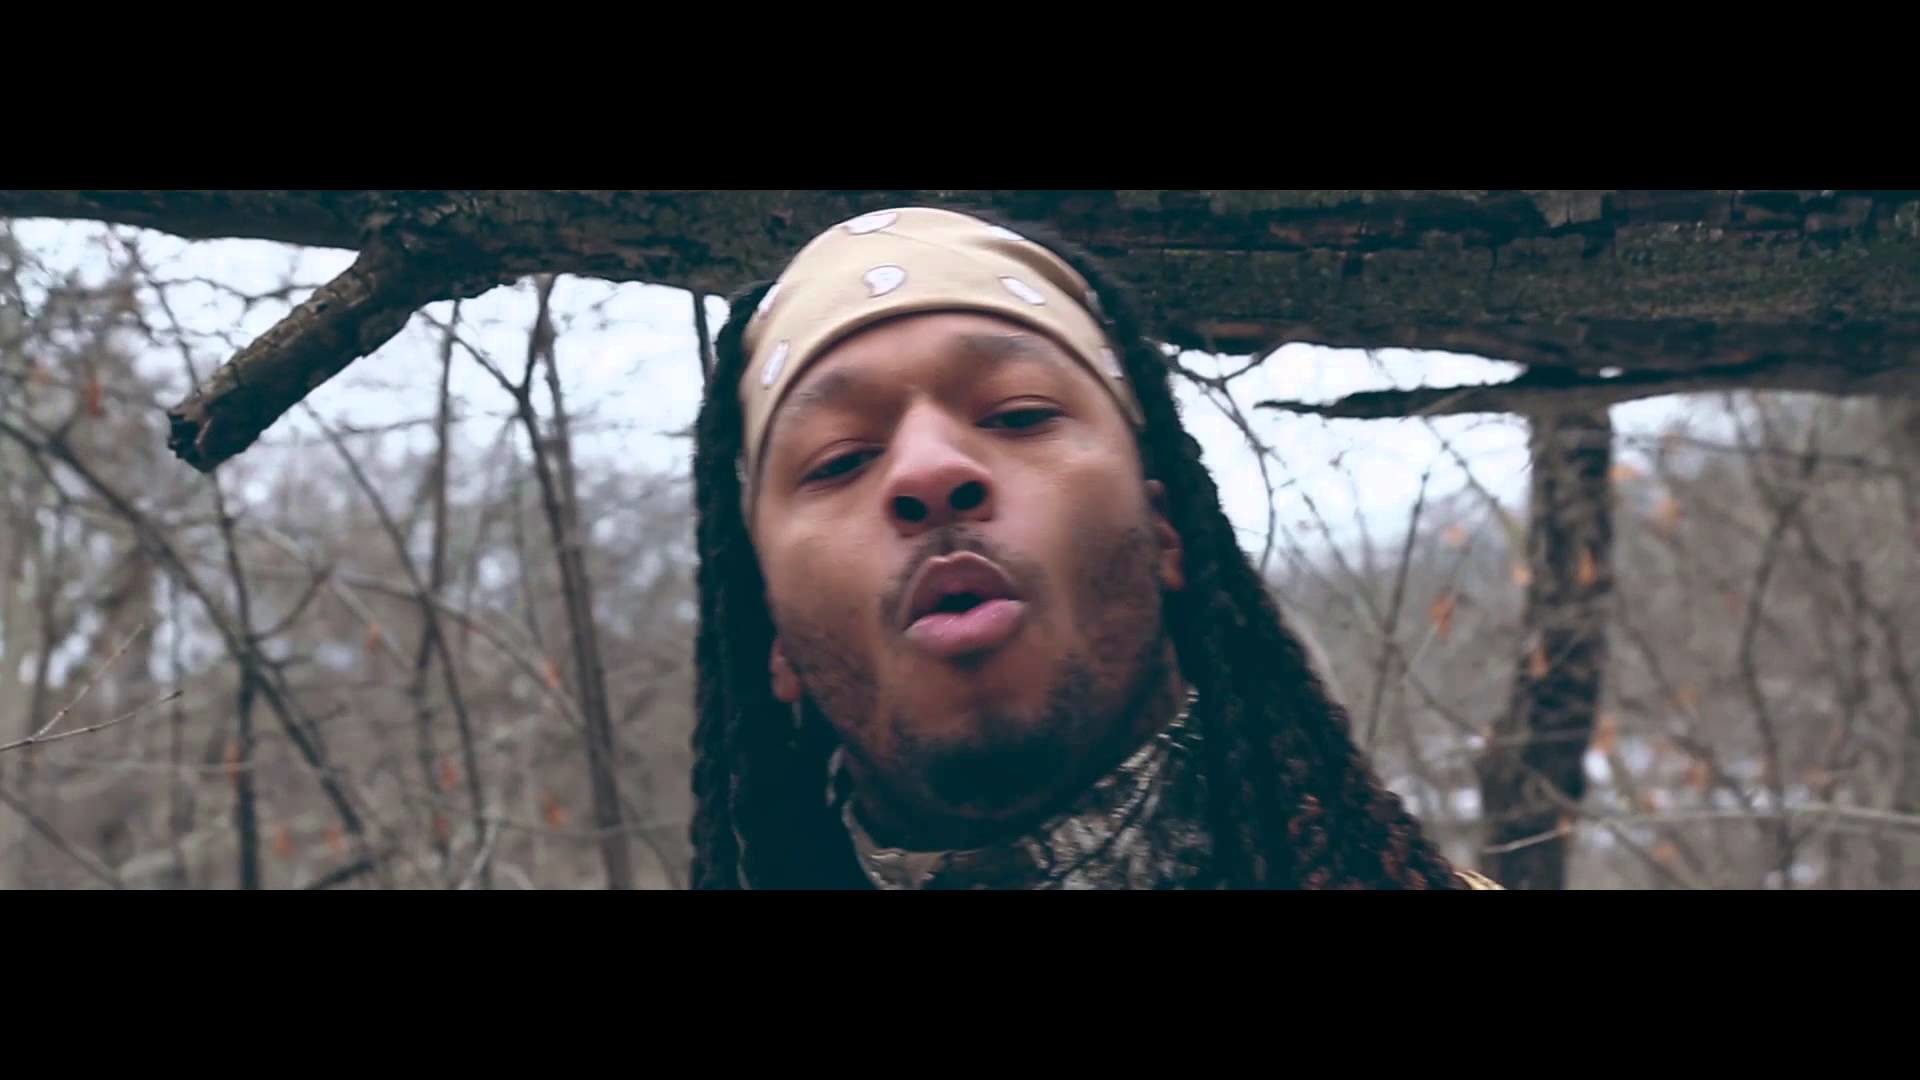 1920x1080 Montana of 300 - "Try Me" Remix (Music Video) | TEAM OF 300 | Pinterest |  Remix music and TVs